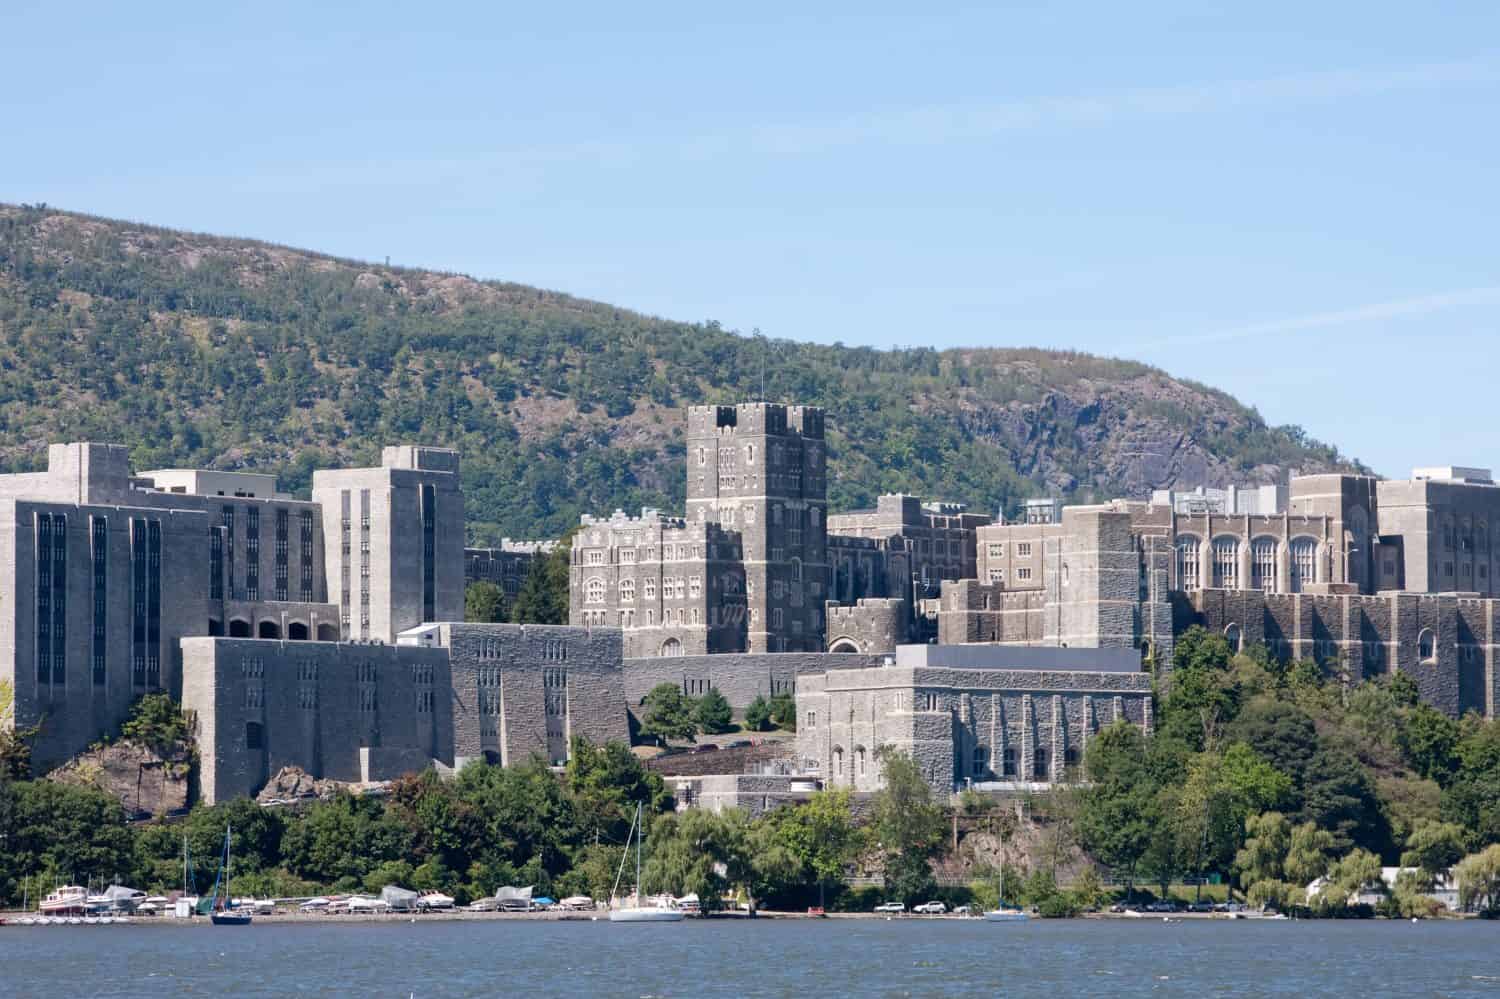 West Point taken from across the Hudson River.